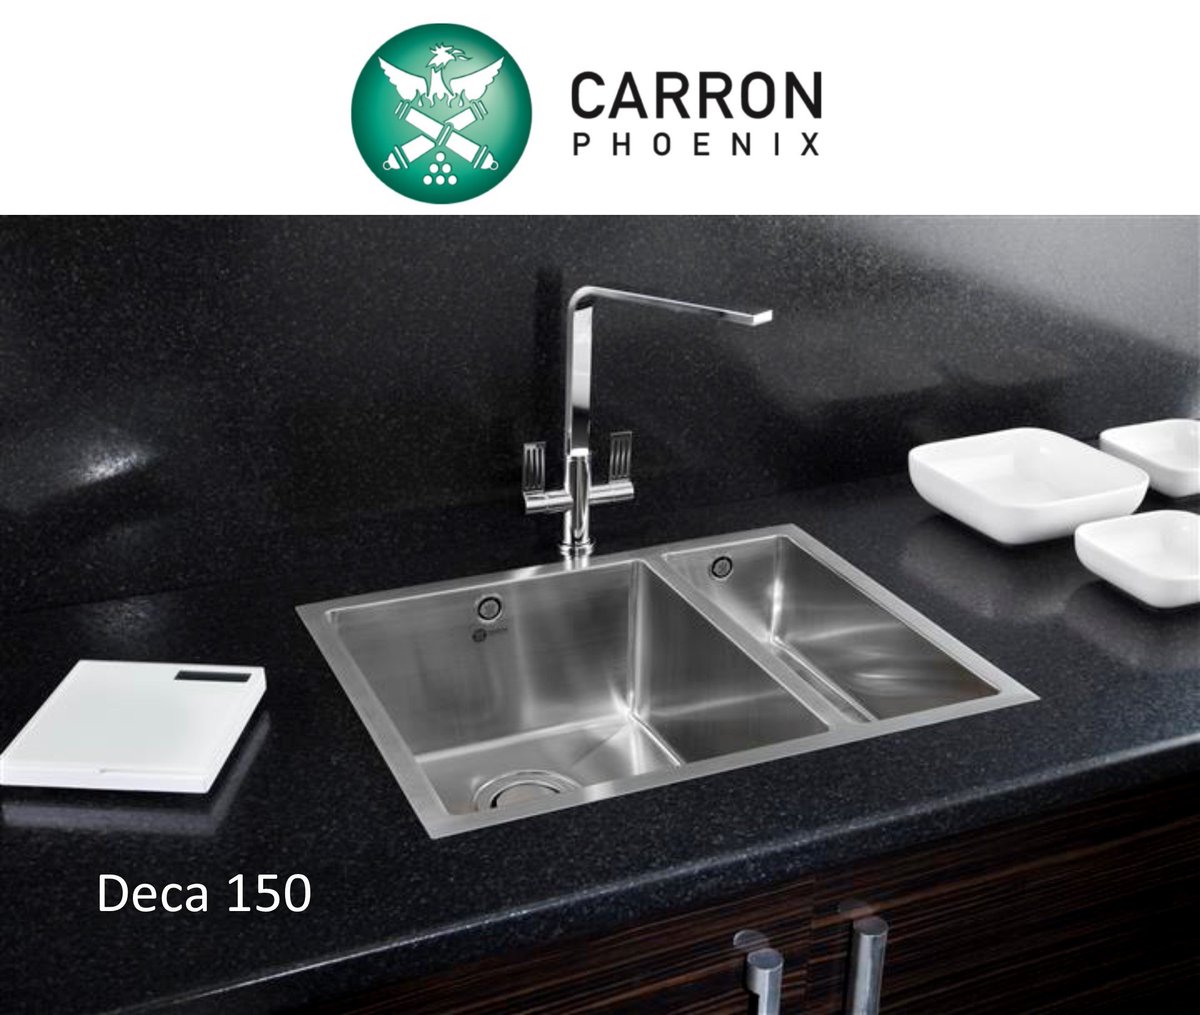 Our ever-popular Deca stainless steel #sink offers a timeless linear design, while being highly practical and good value. What’s not to love? 😍 ow.ly/lBMj50wWbYN